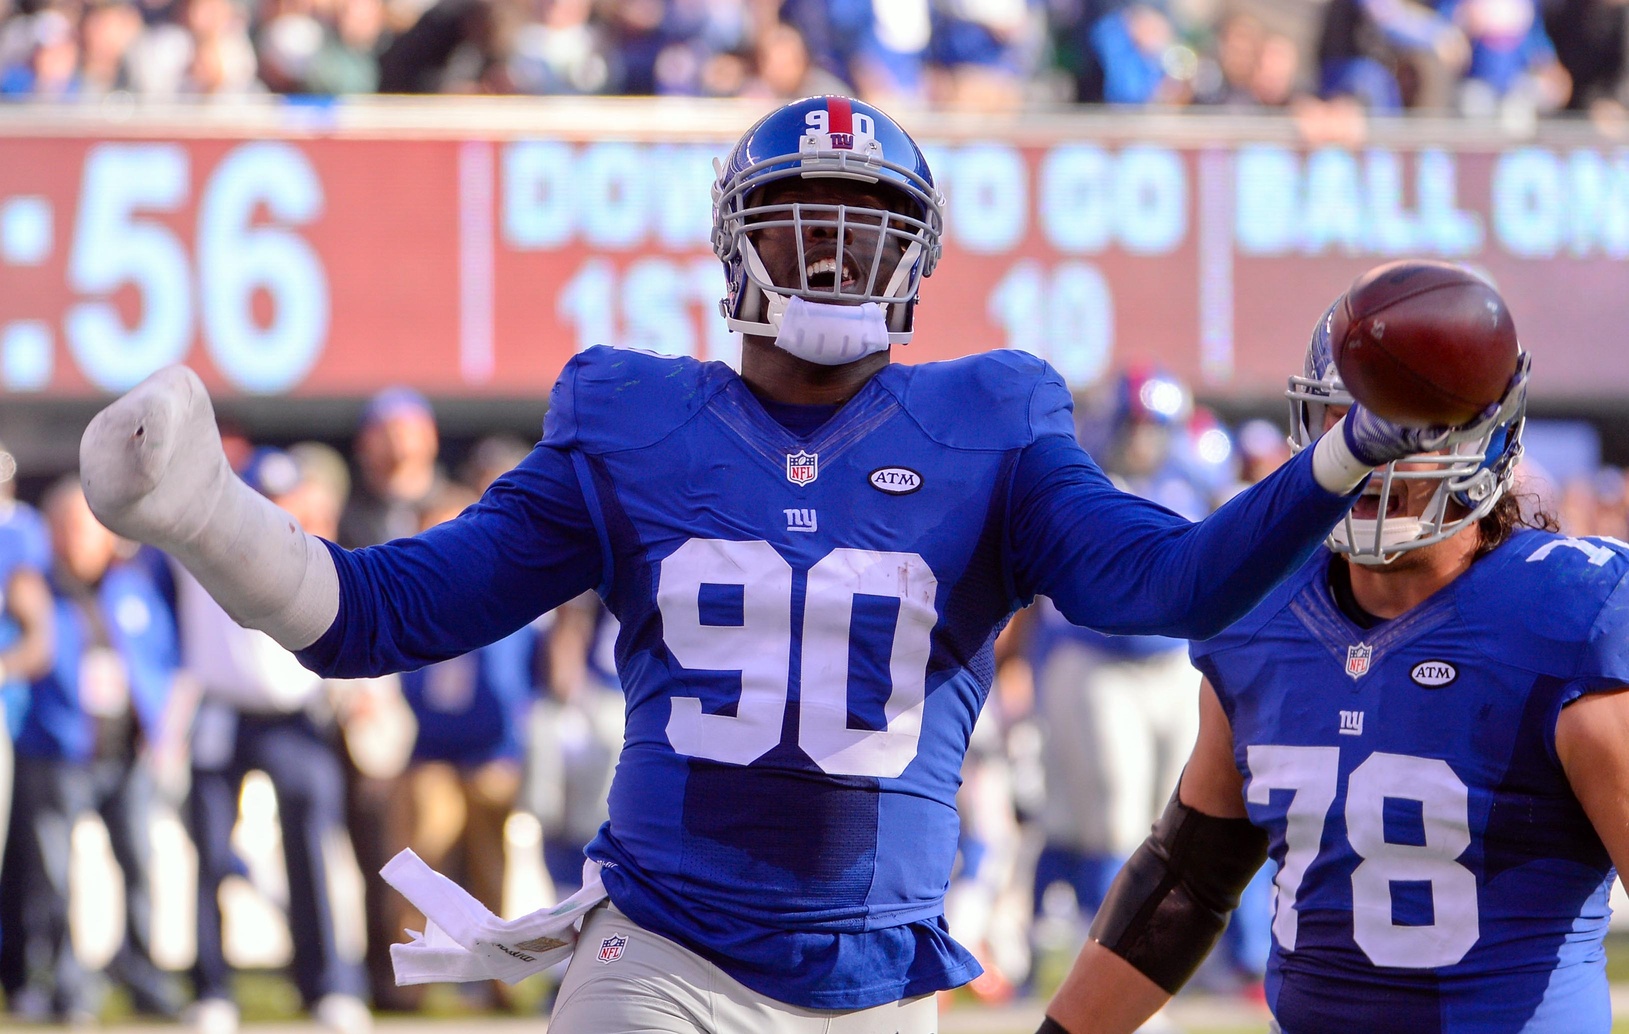 Watch: Jason Pierre-Paul is able to grip and bench press successfully